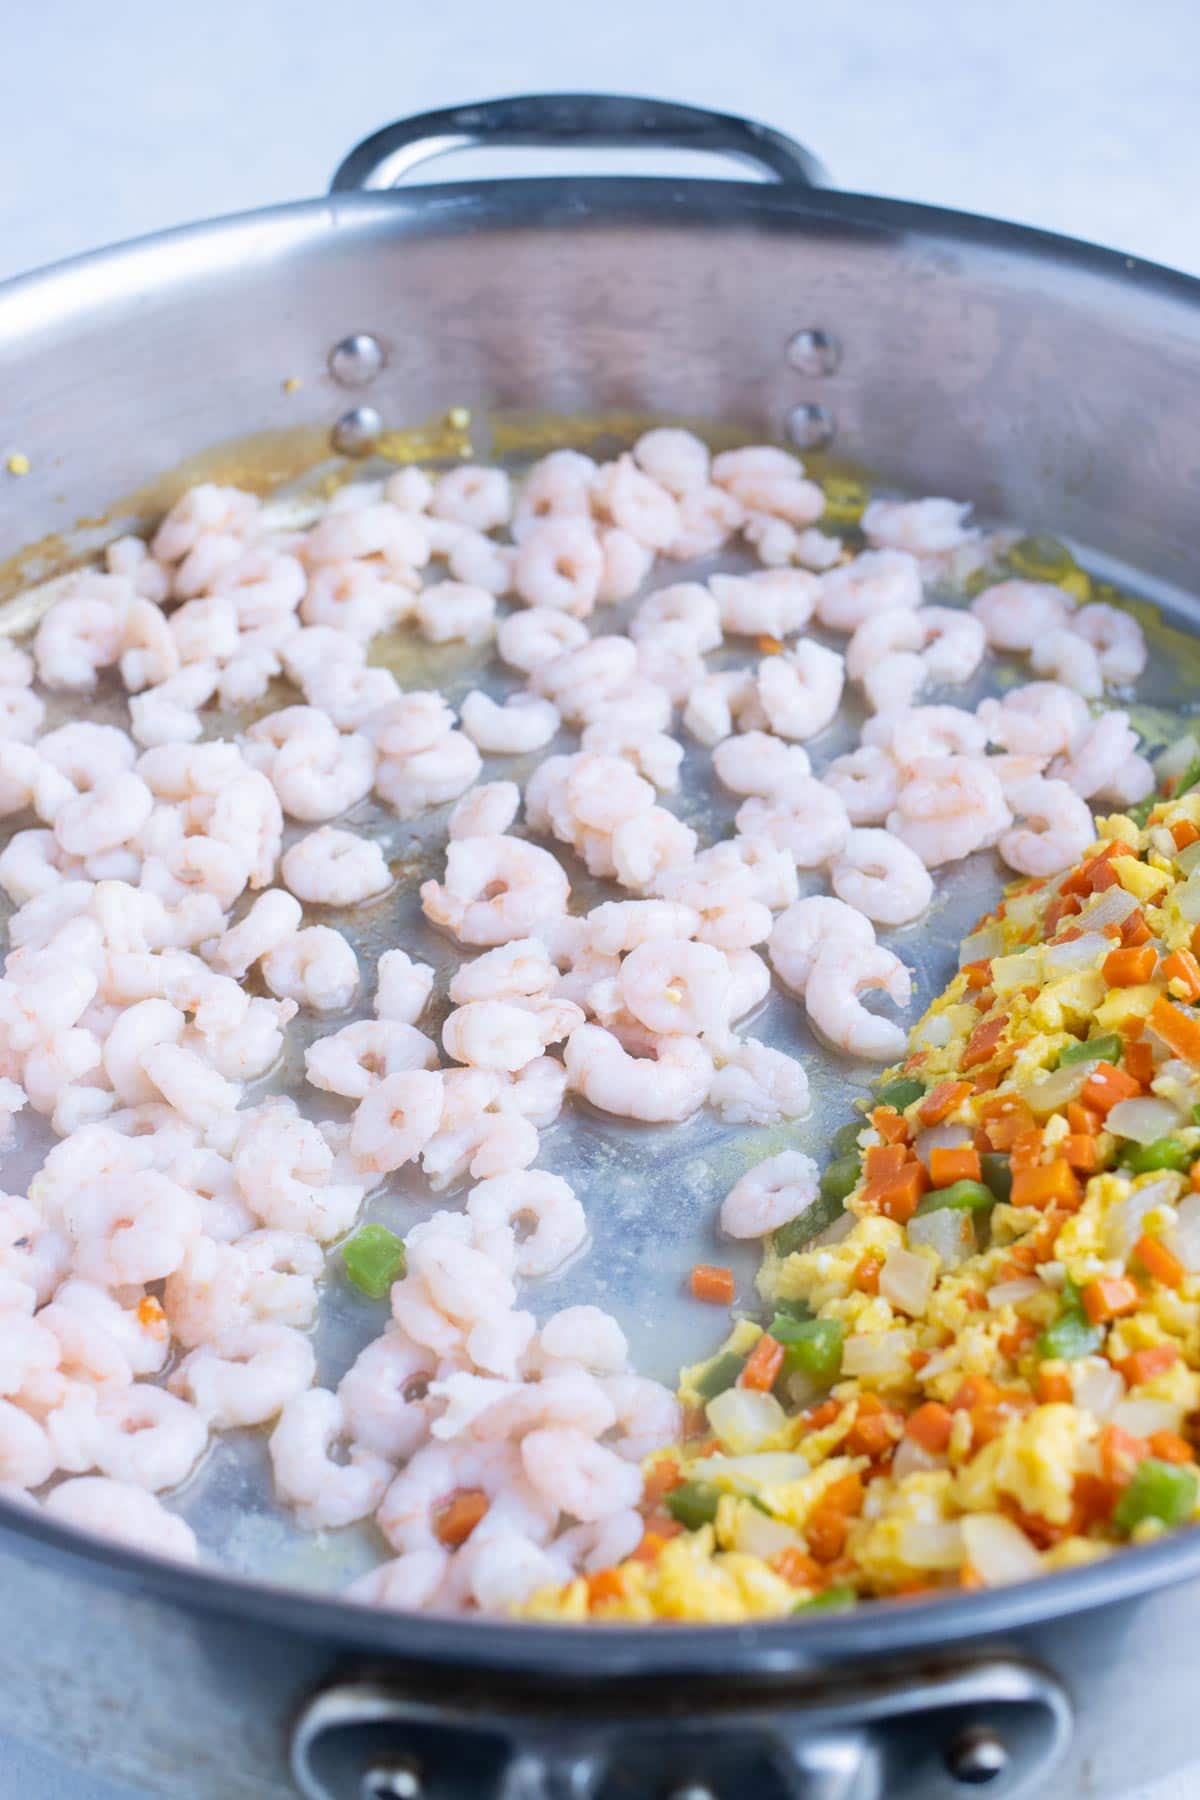 Shrimp is added to one side of the skillet.